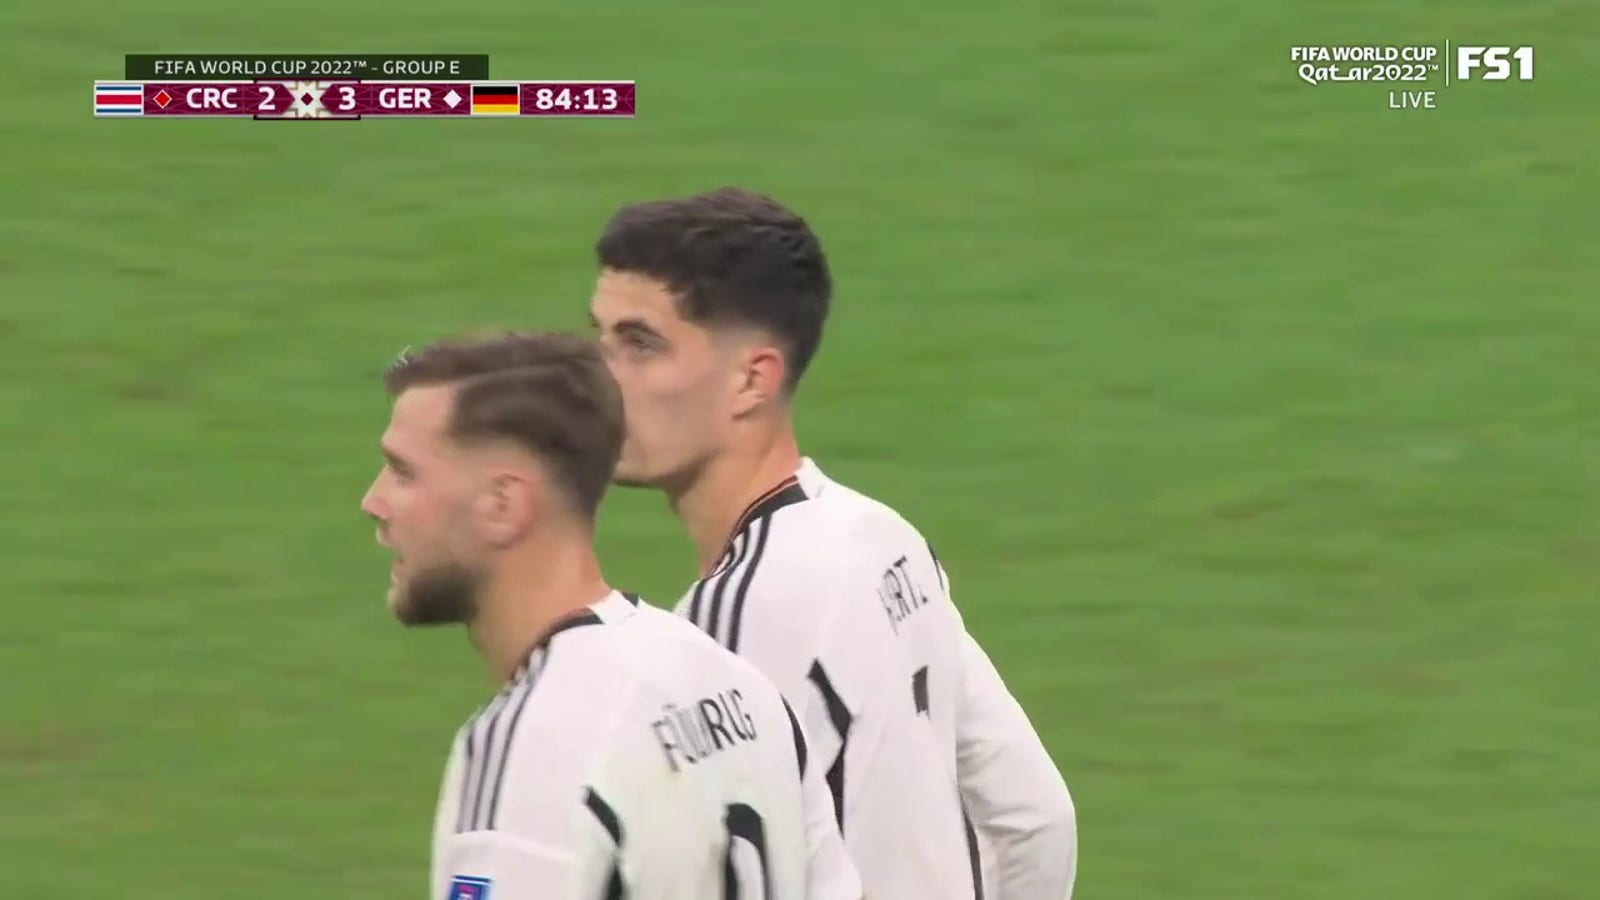 Kai Havertz of Germany scored against Costa Rica in the 84th minute